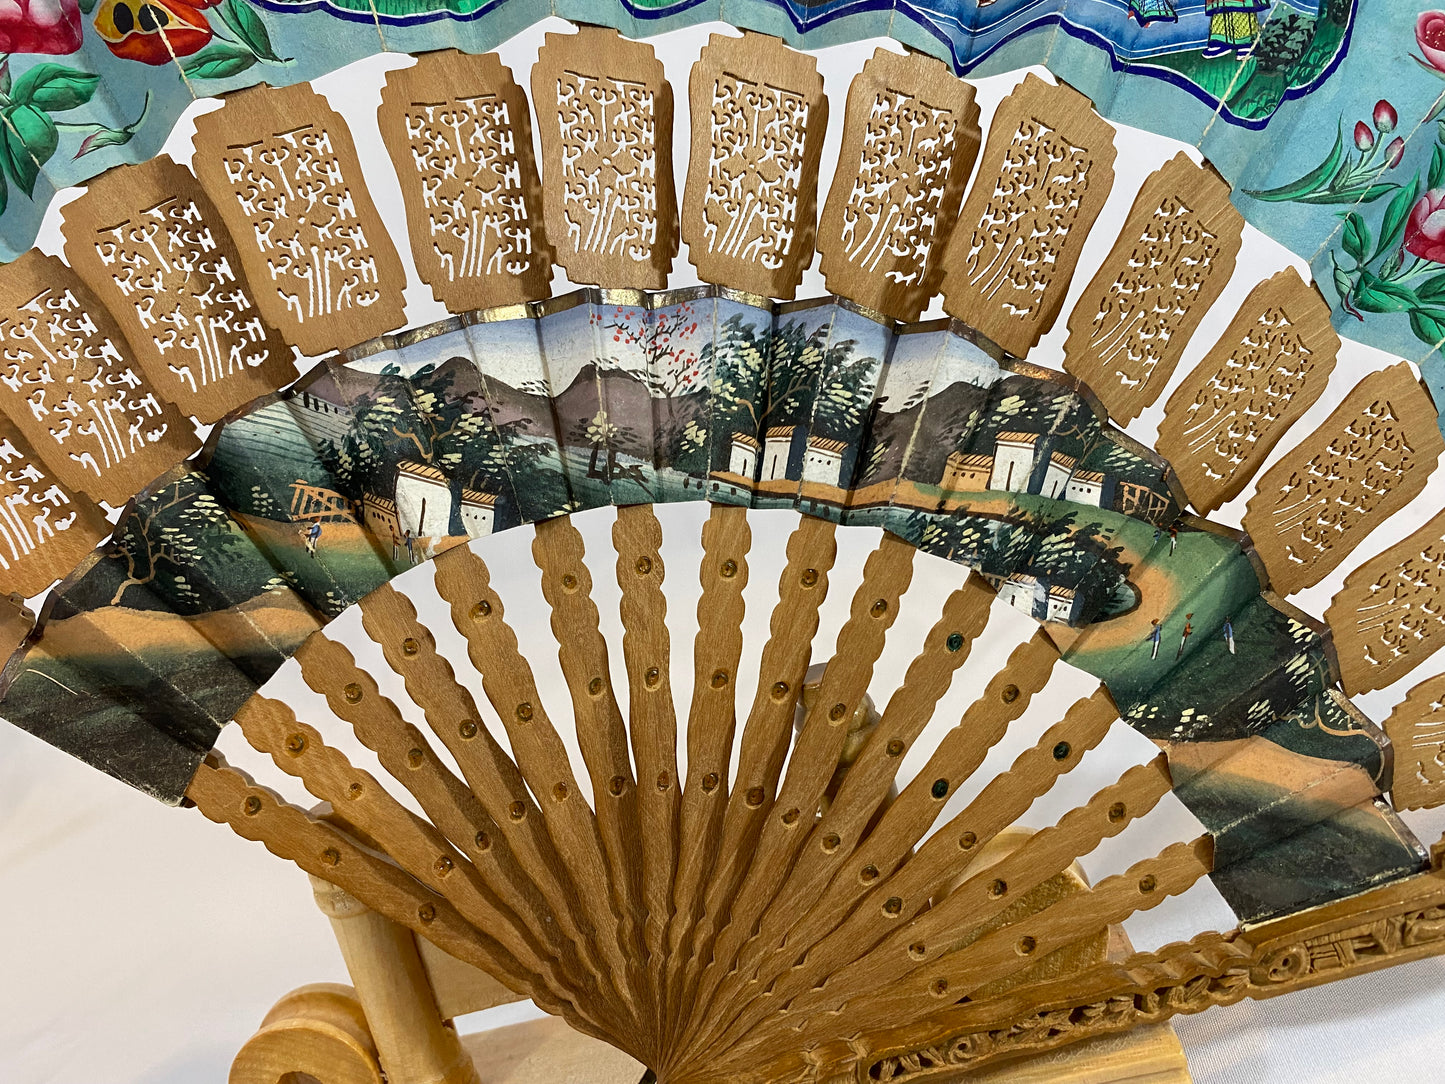 19th Century Chinese Cabriolet Fan